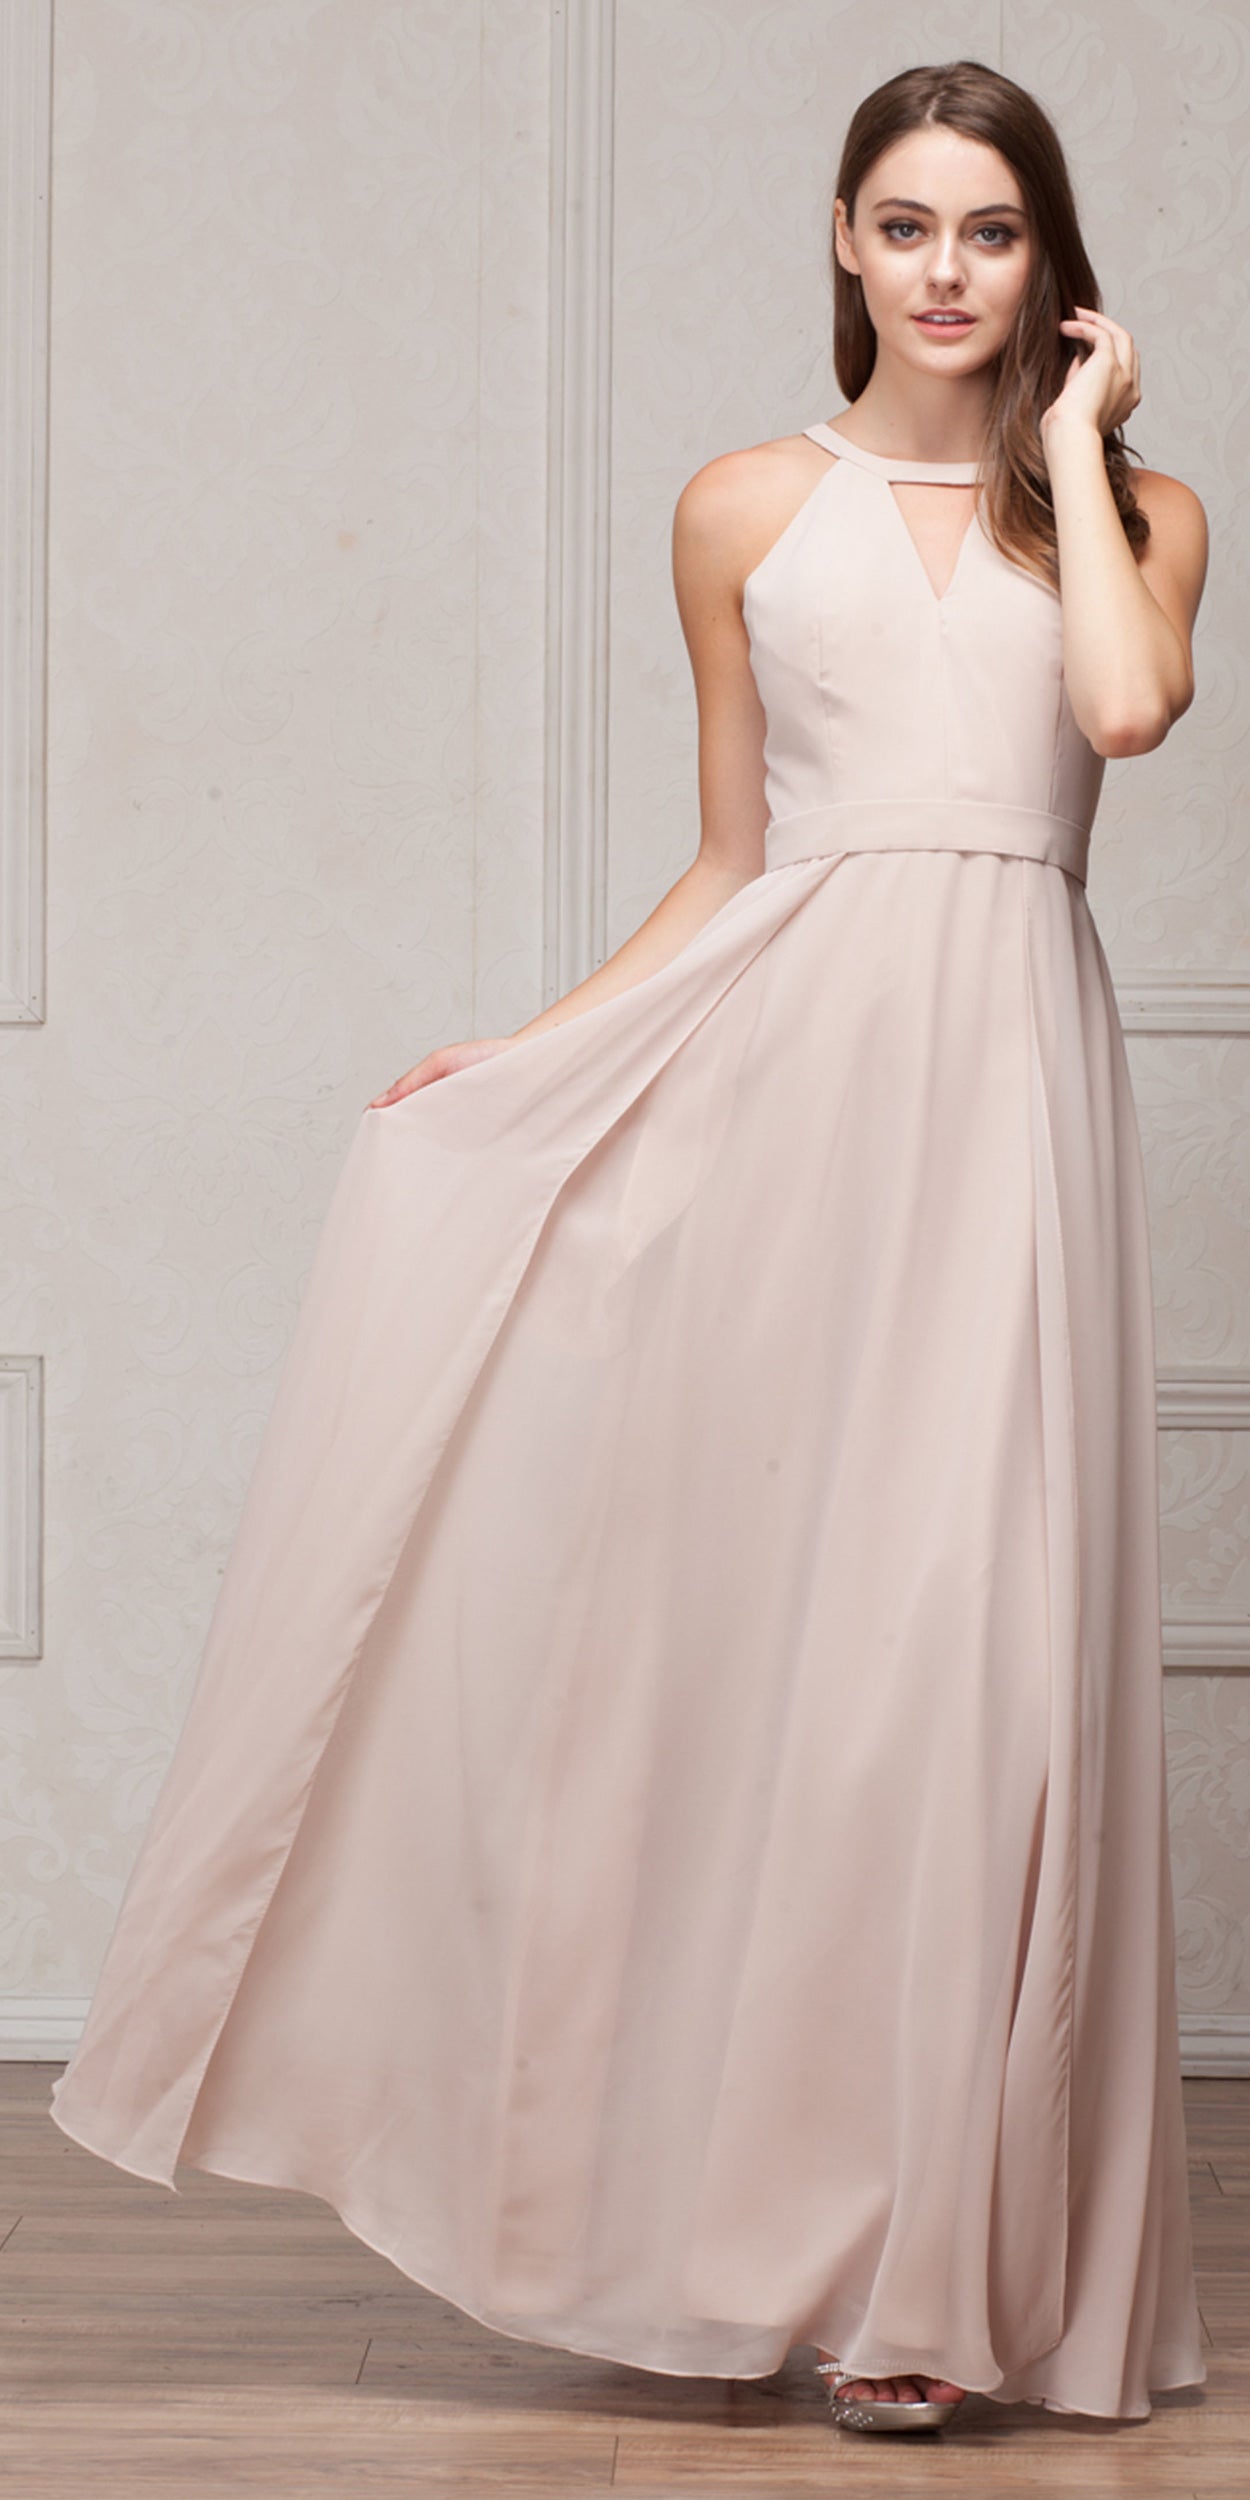 Image of High Round Neck Princess Cut Long Bridesmaid Dress in Champaign